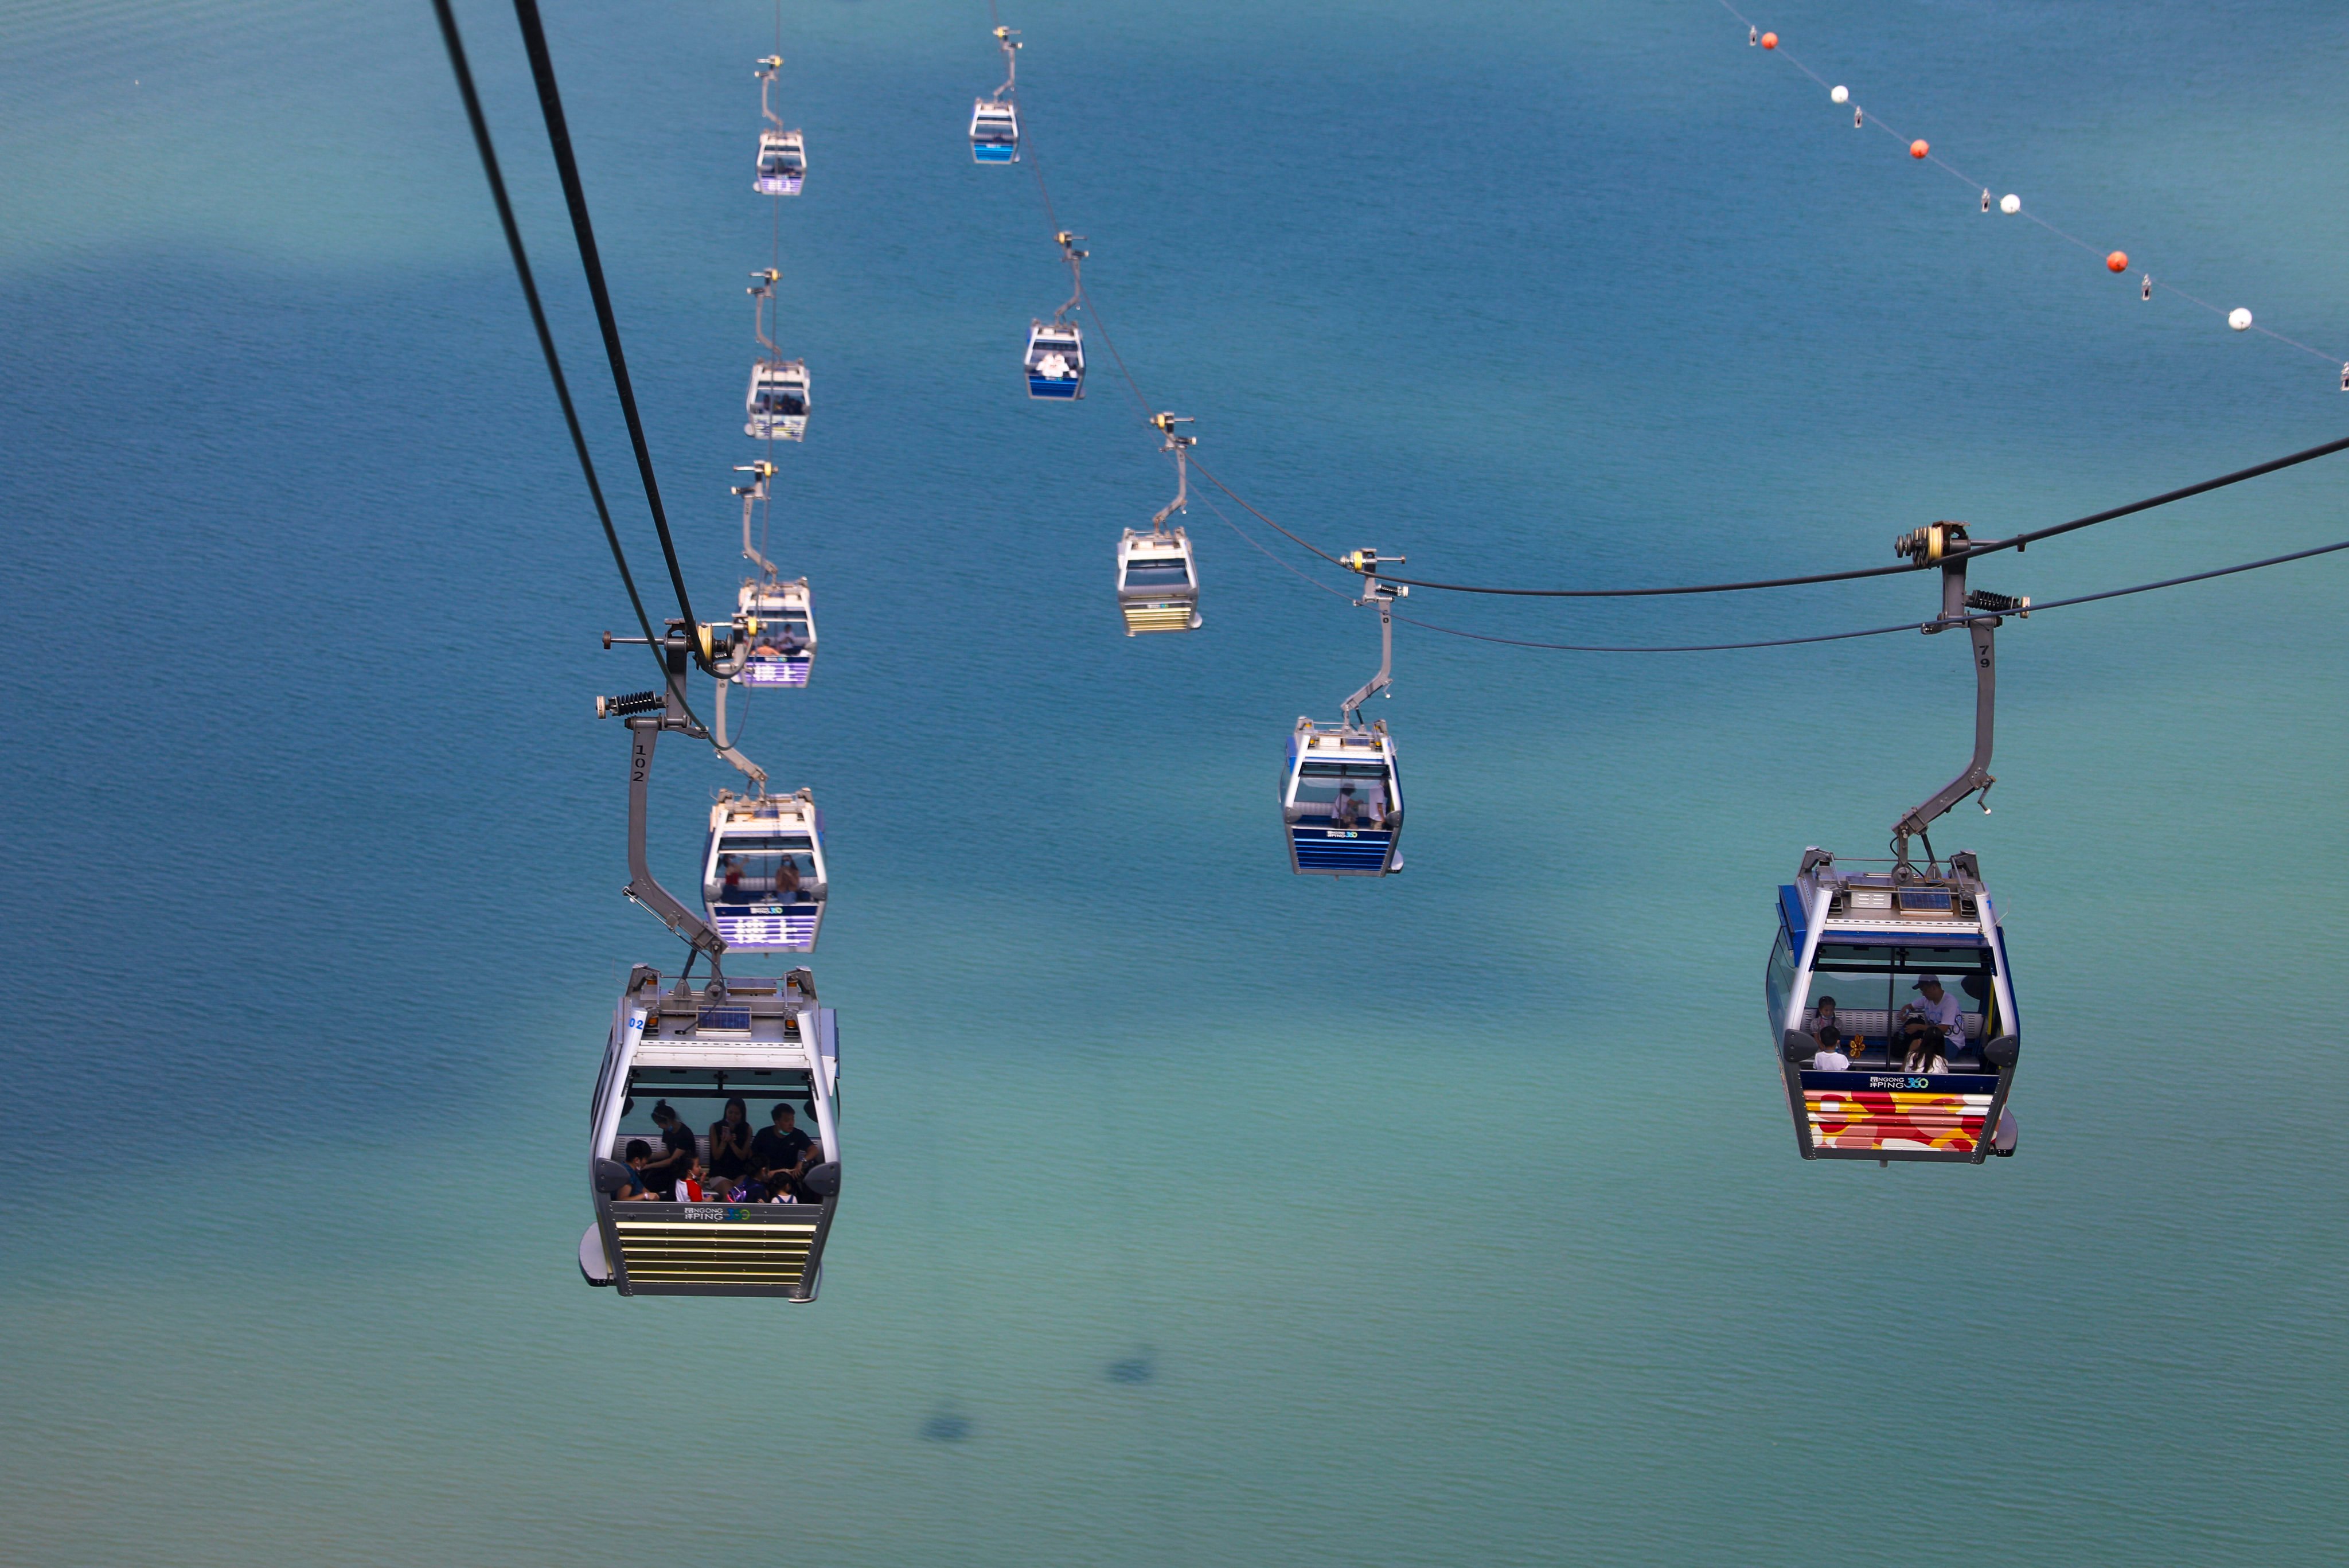 The Ngong Ping 360 cable car attraction is on the way up after a coronavirus slump, the firm says.  Photo: Dickson Lee